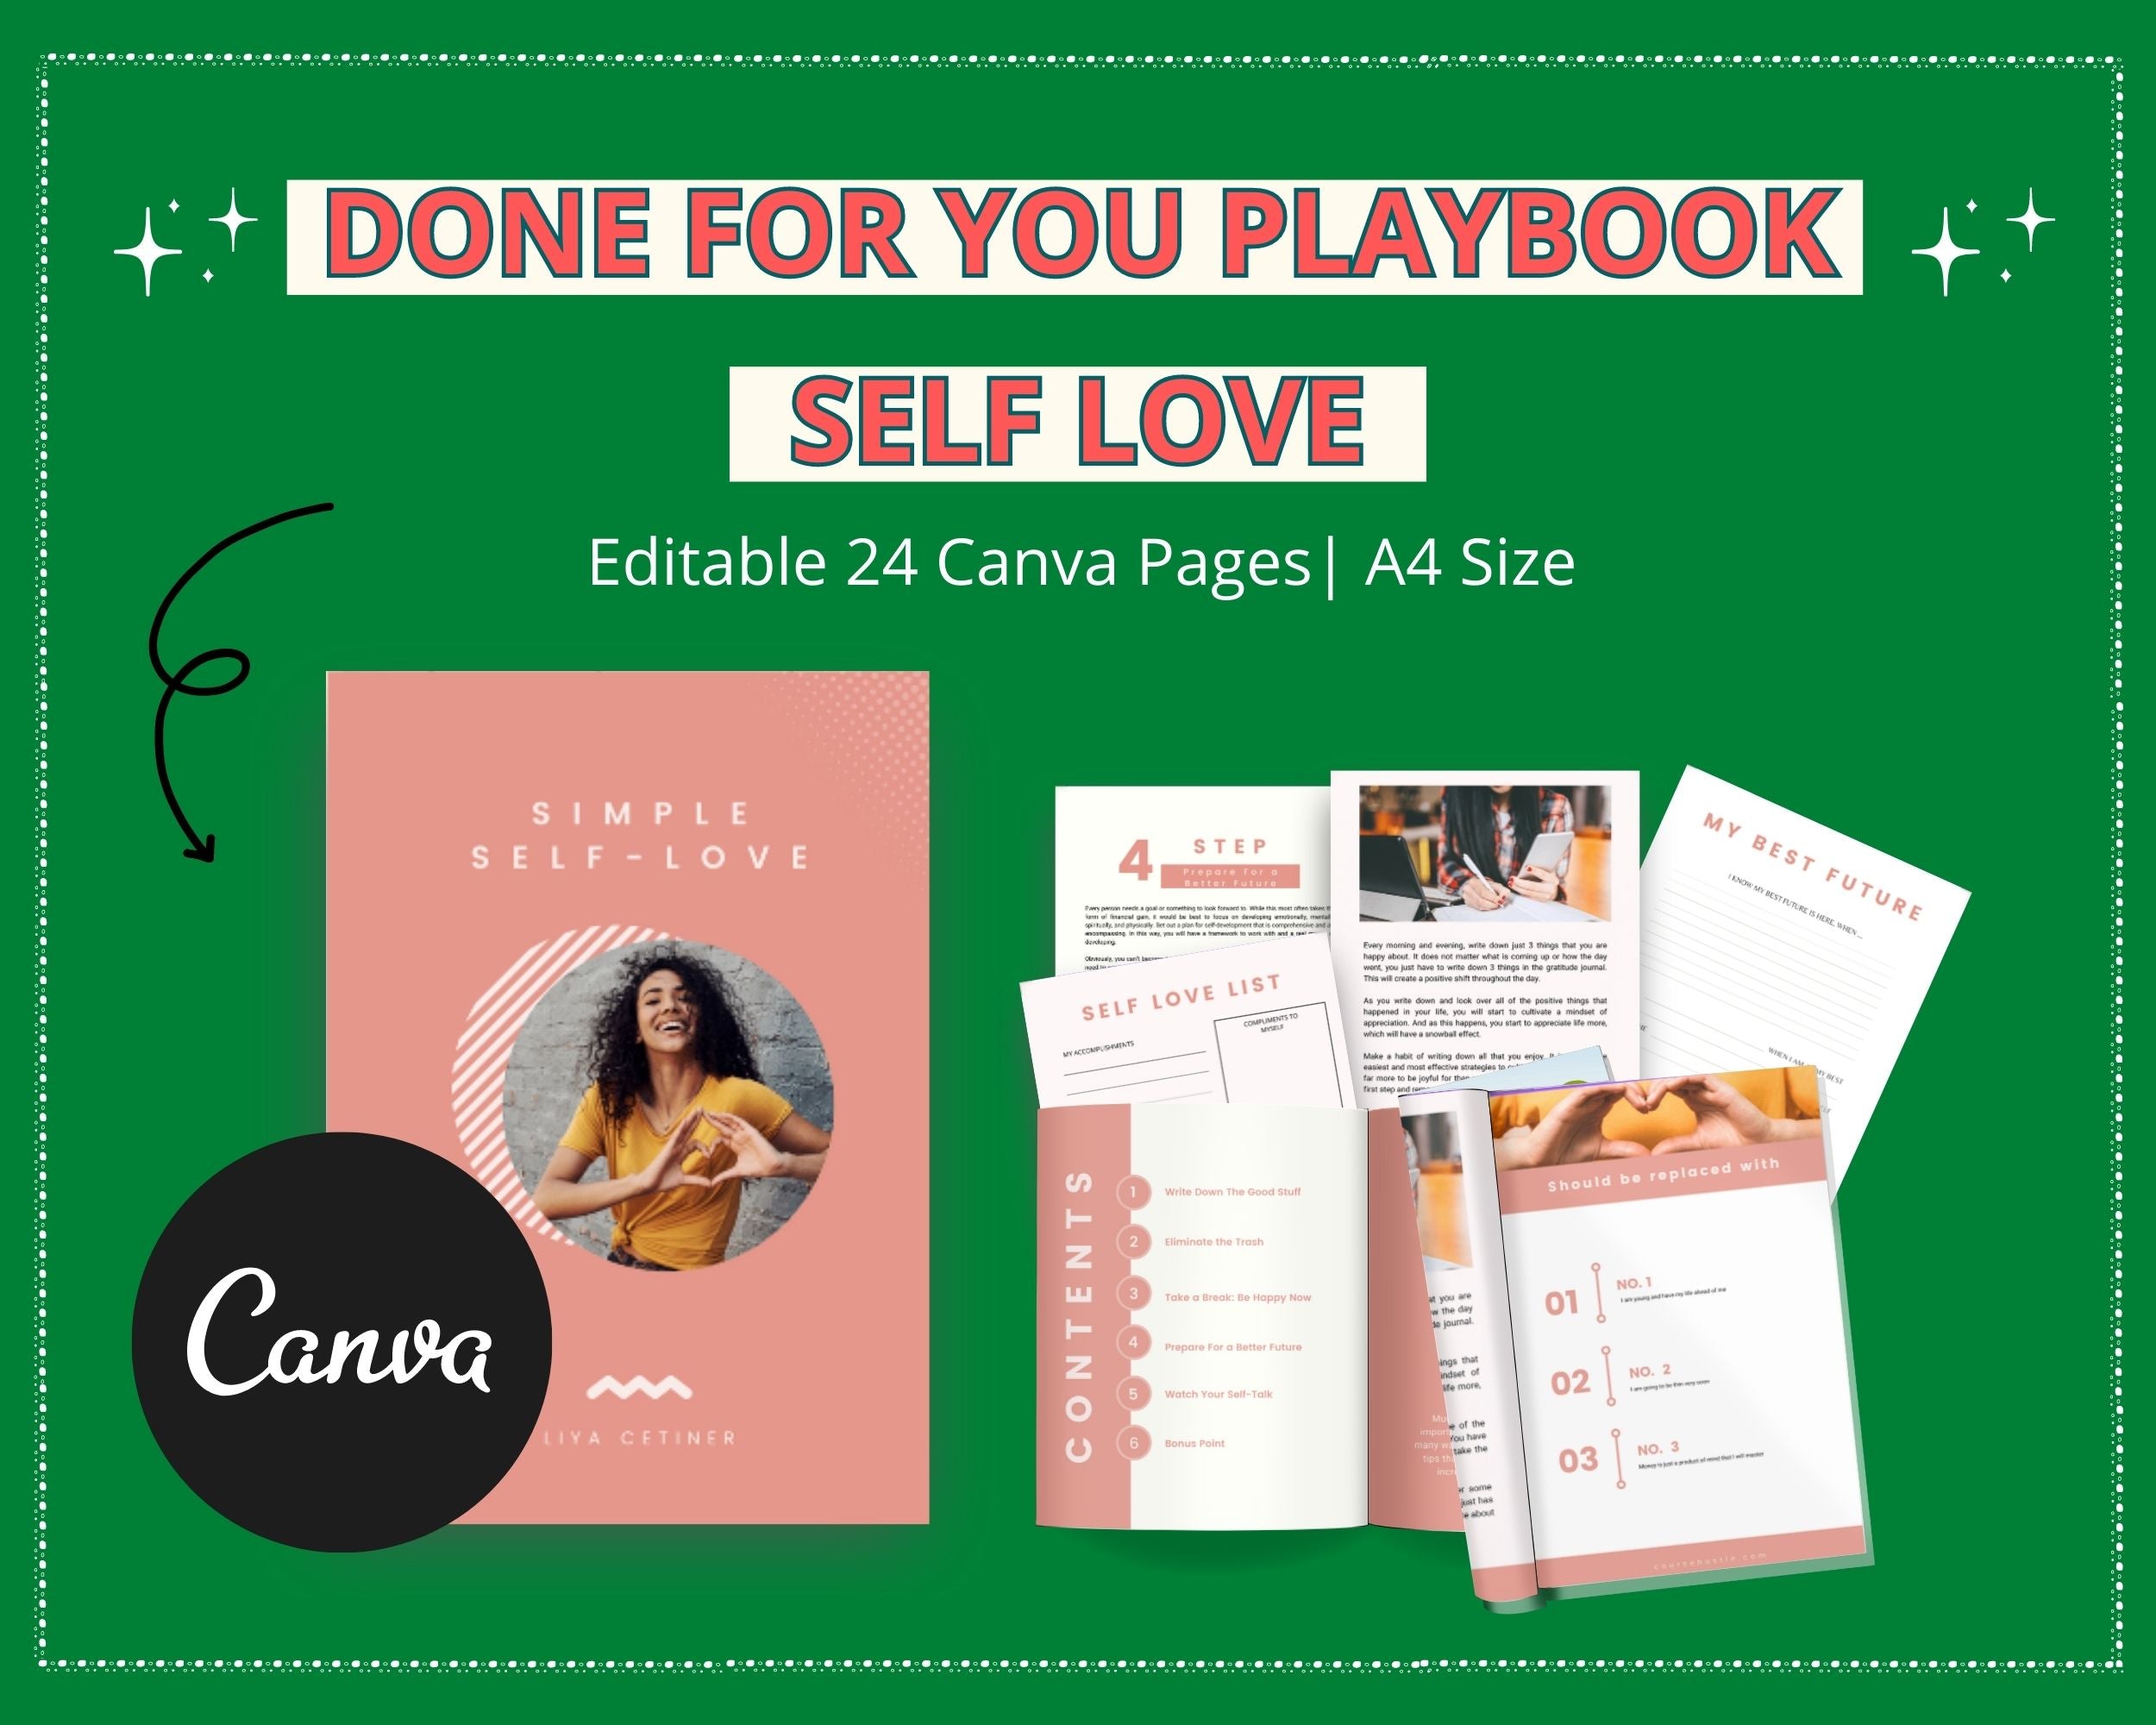 Done for You Self-Love Playbook in Canva | Editable A4 Size Canva Template